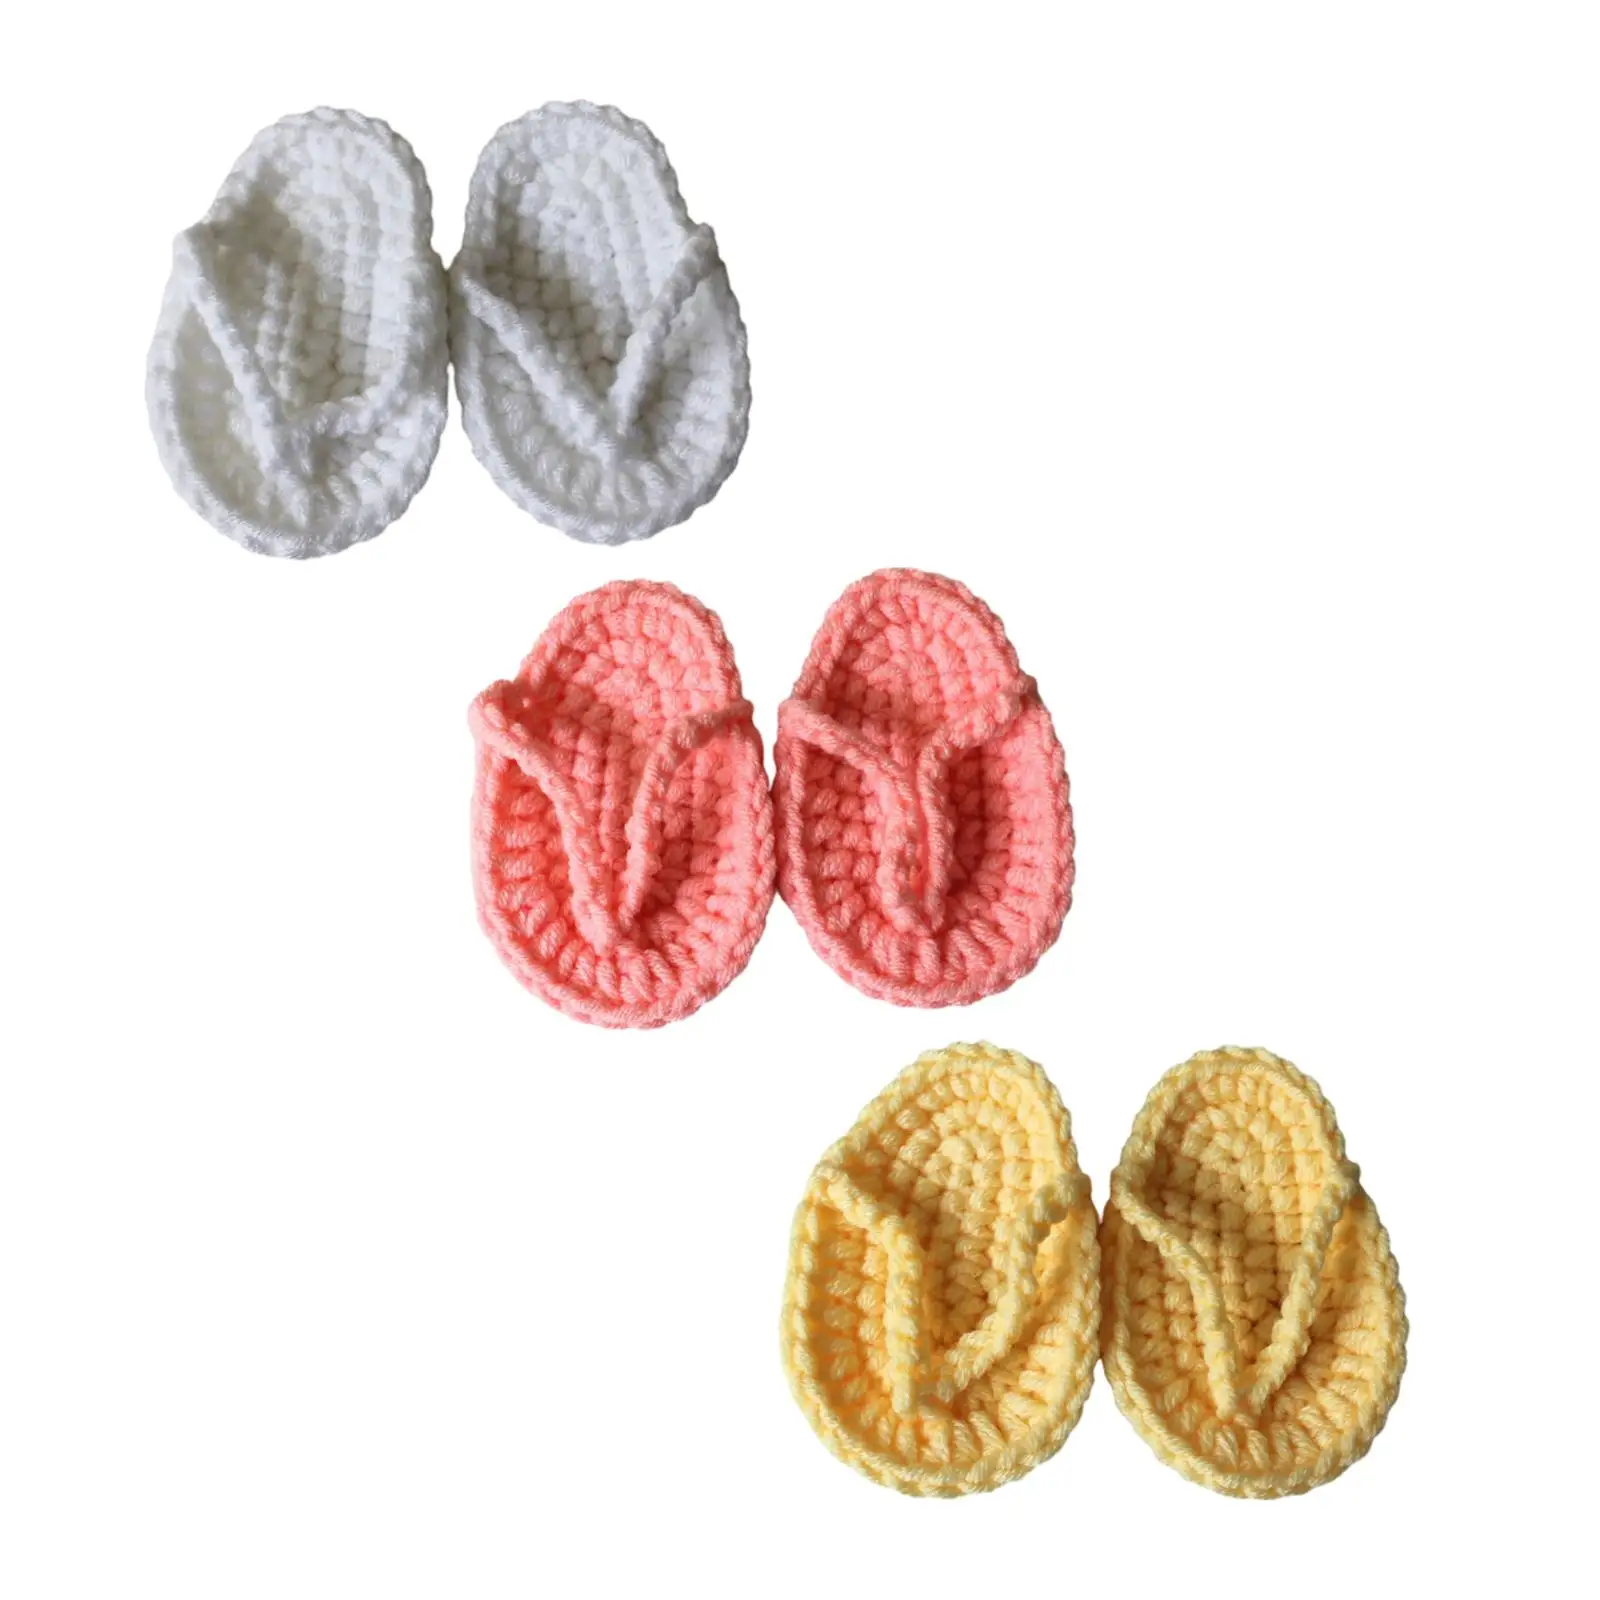 Infant Slippers Newborn Props for Newborn Infant Baby Crochet Skin Friendly 2.75in Baby Photo Props Children`s Shoes Mini 1 Pair